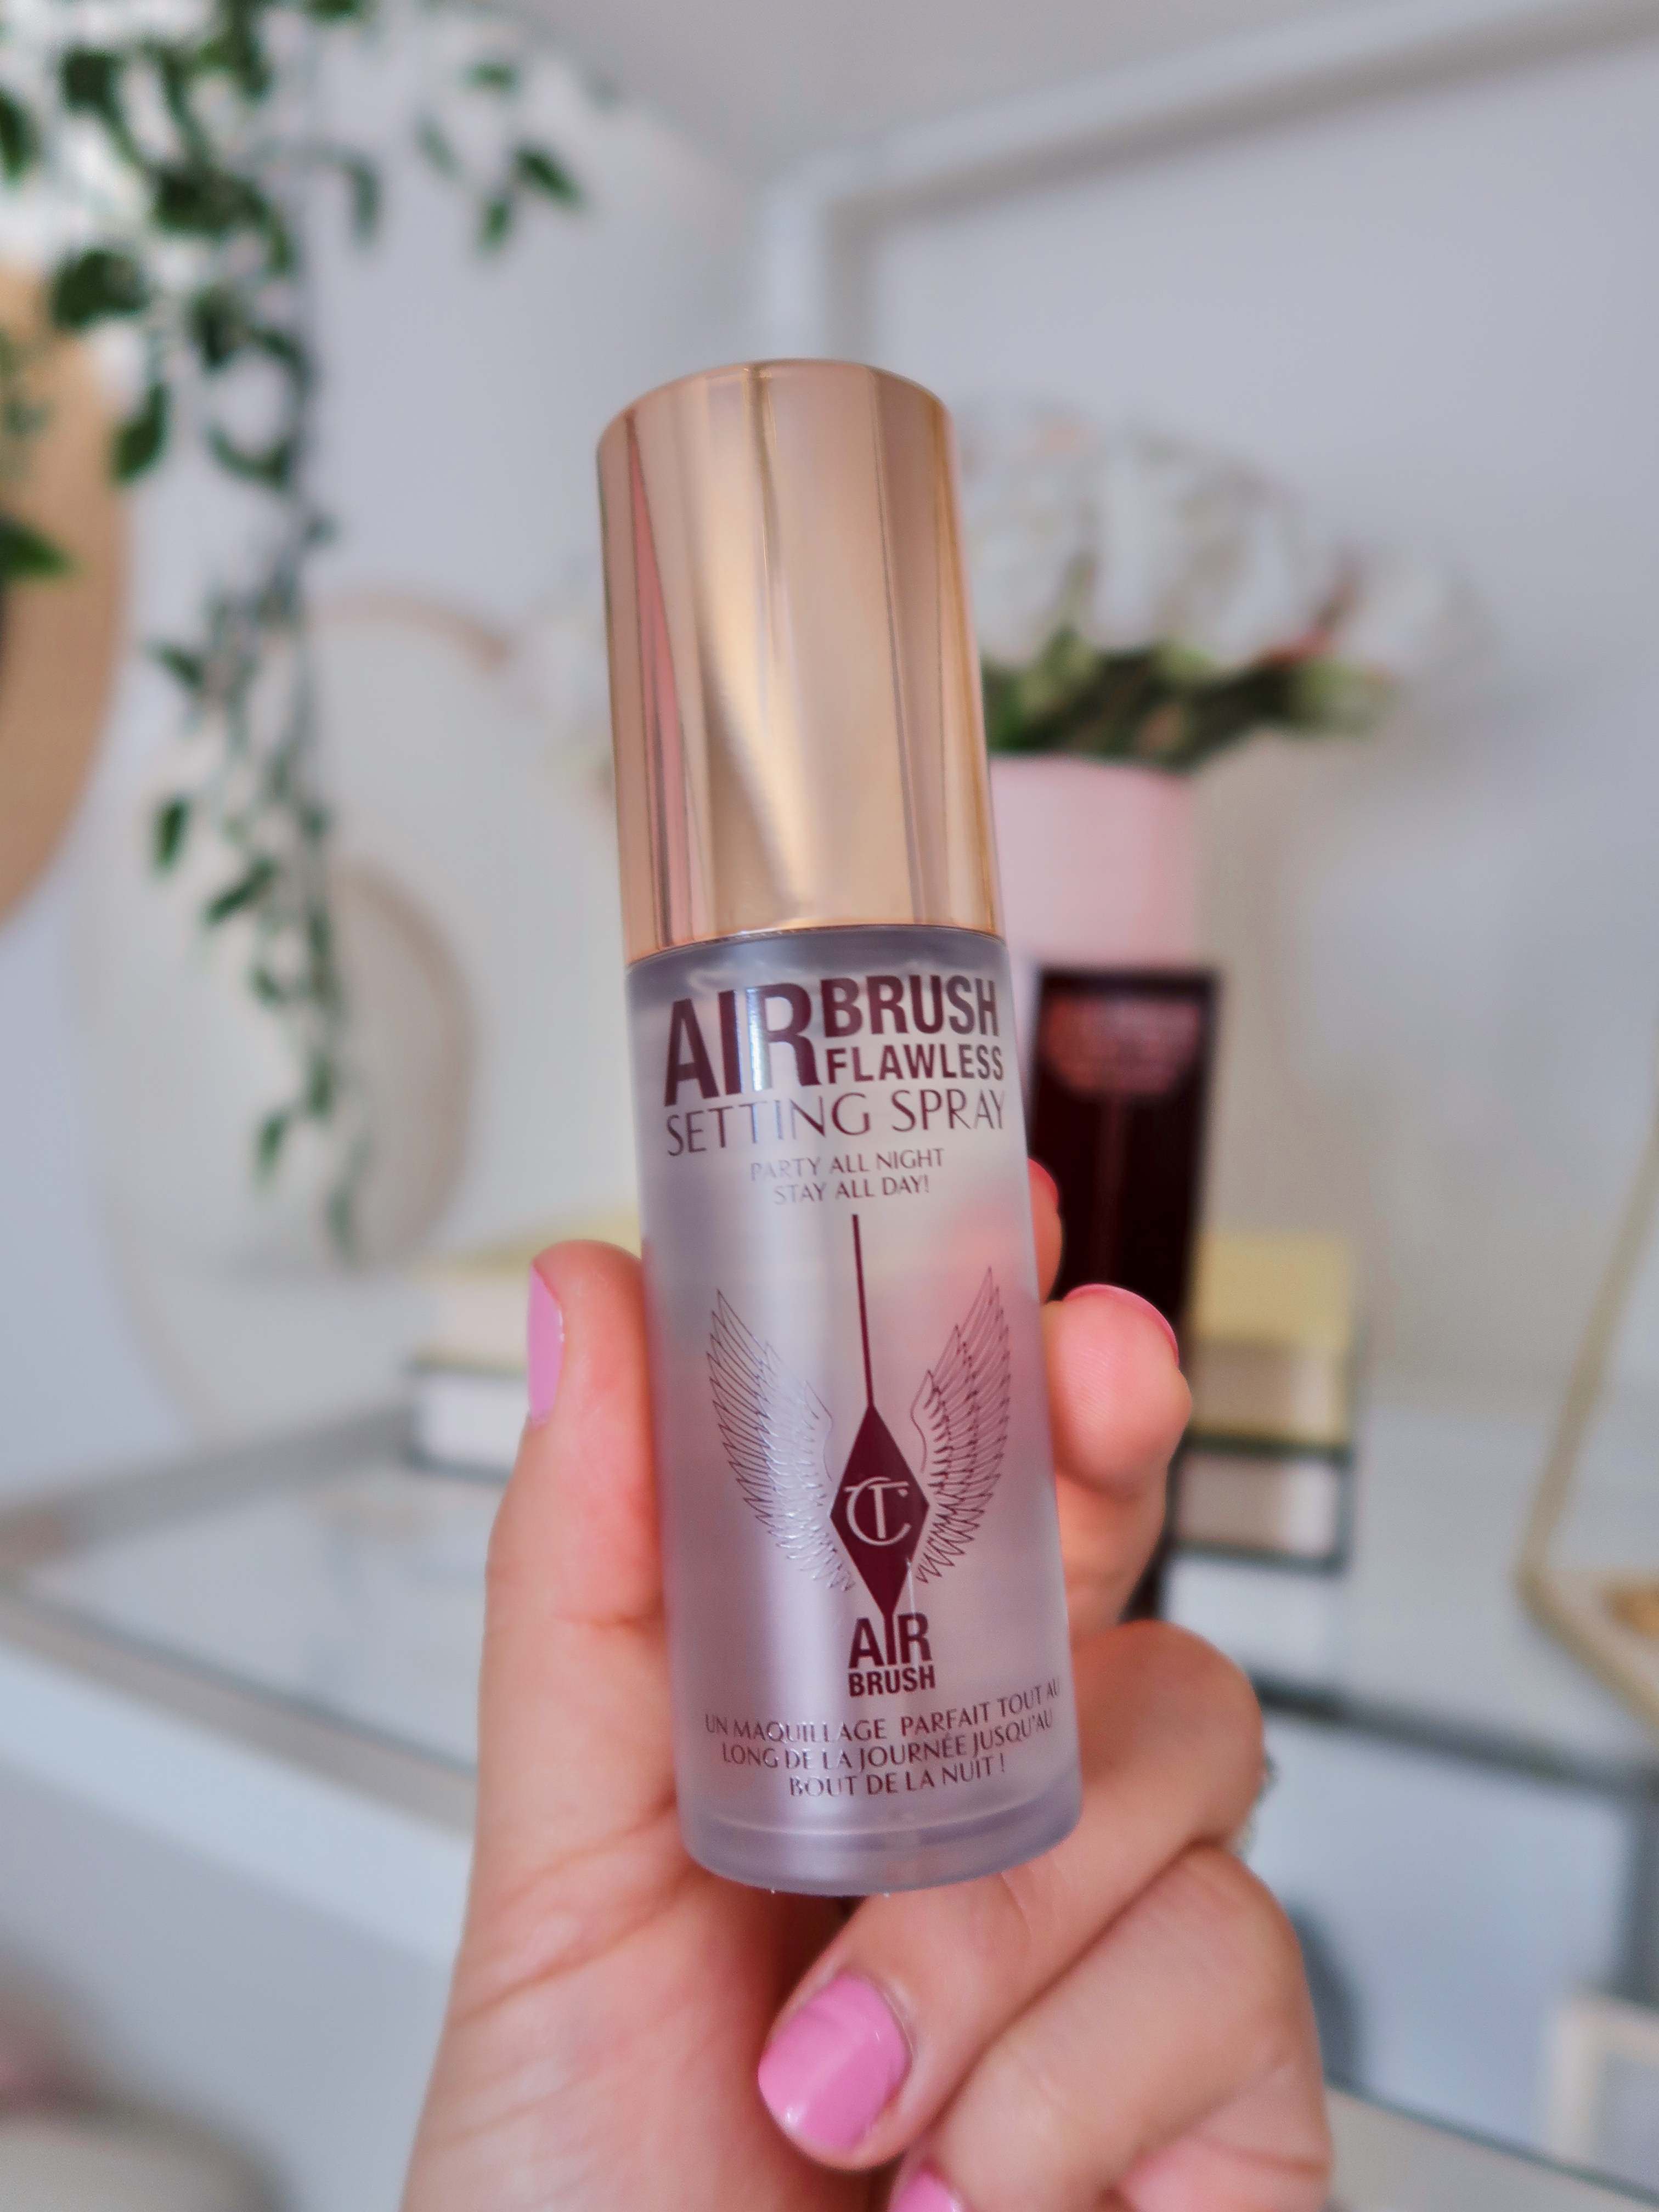 FLOATING IN DREAMS - Reviews . Makeup . Fashion . everyday beauty made  sense. Charlotte Tilbury Airbrush Flawless Setting Spray review